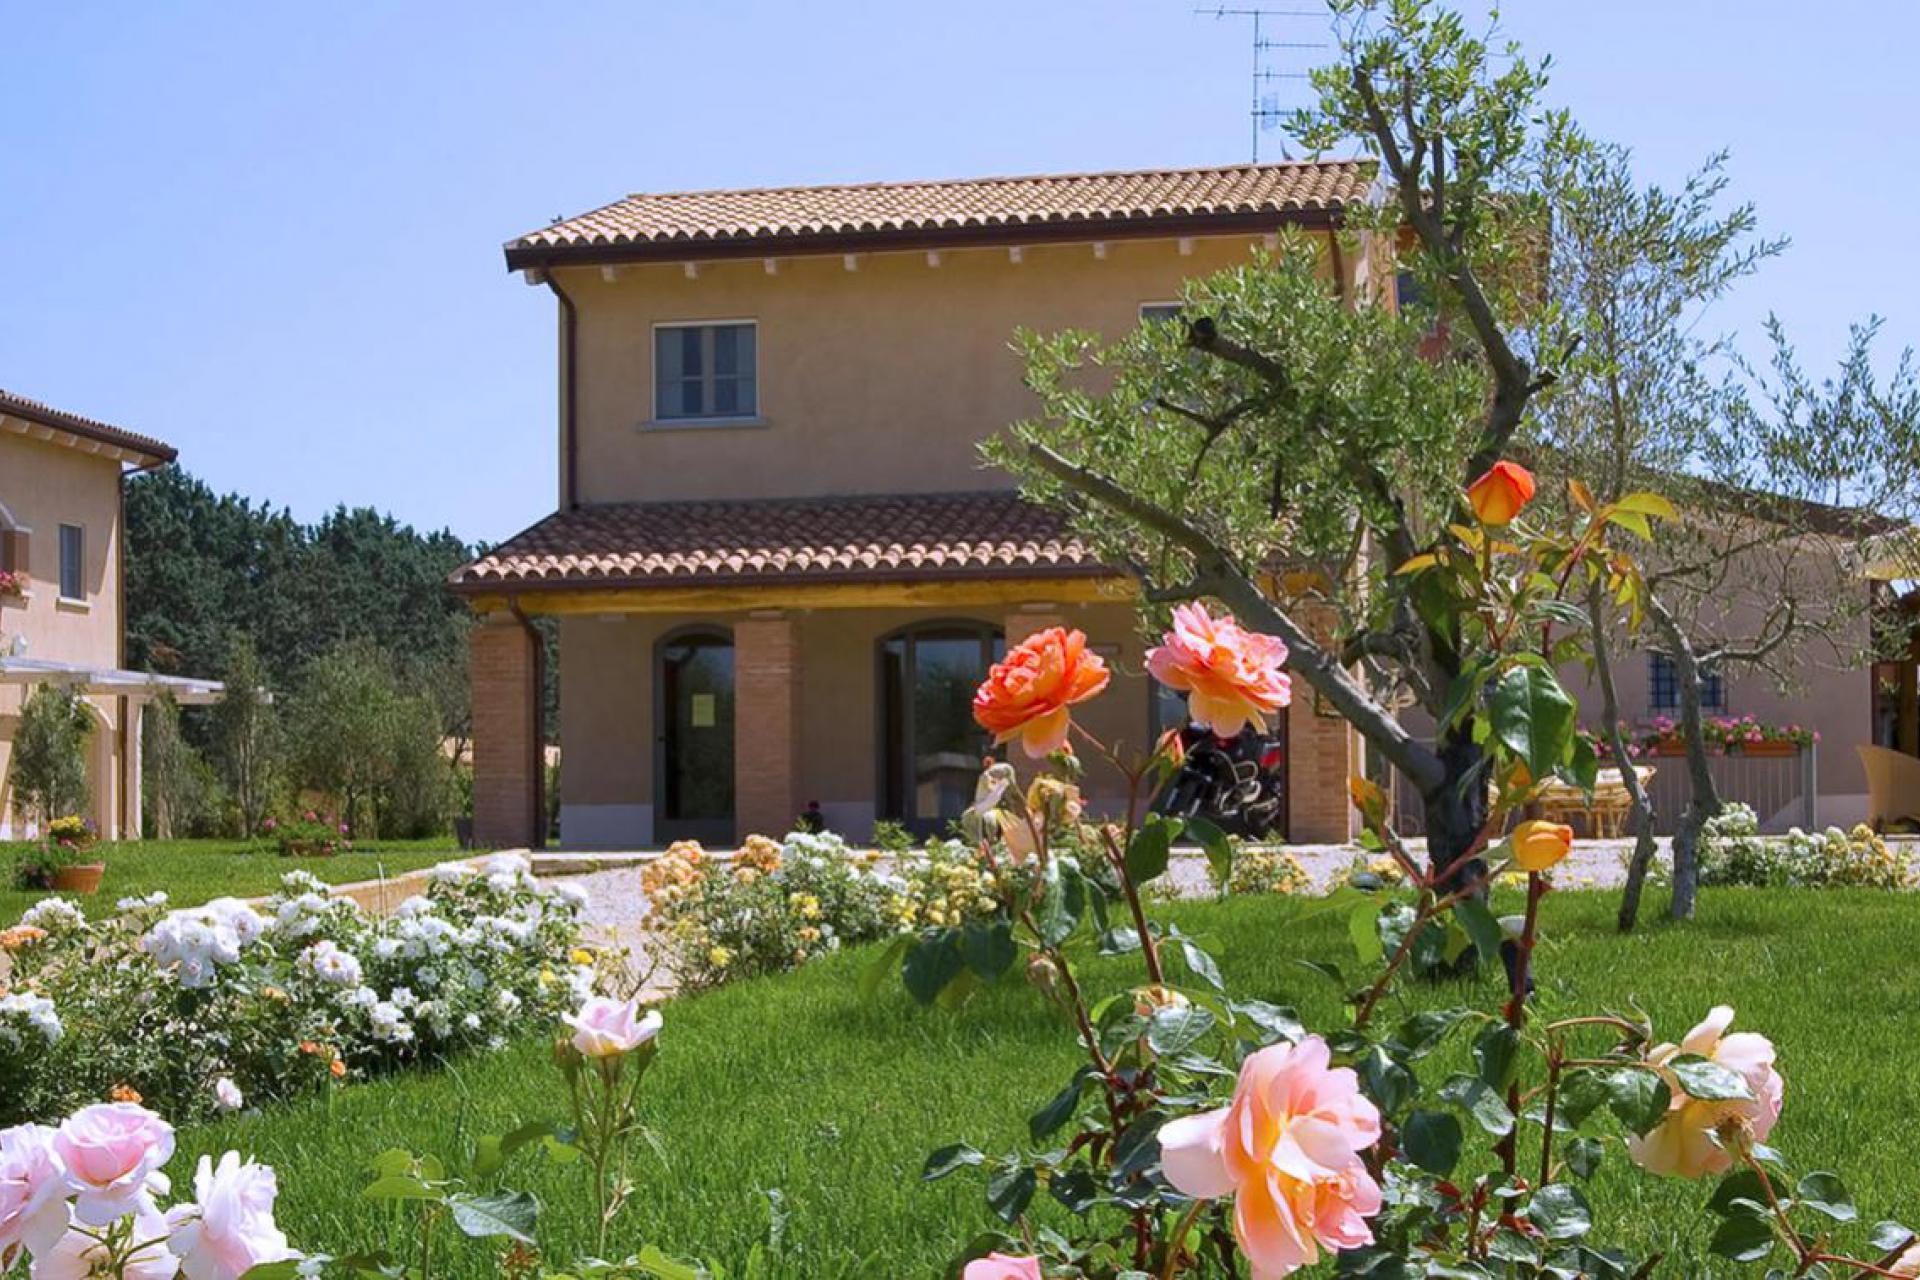 Luxury agriturismo near the sea in southern Tuscany